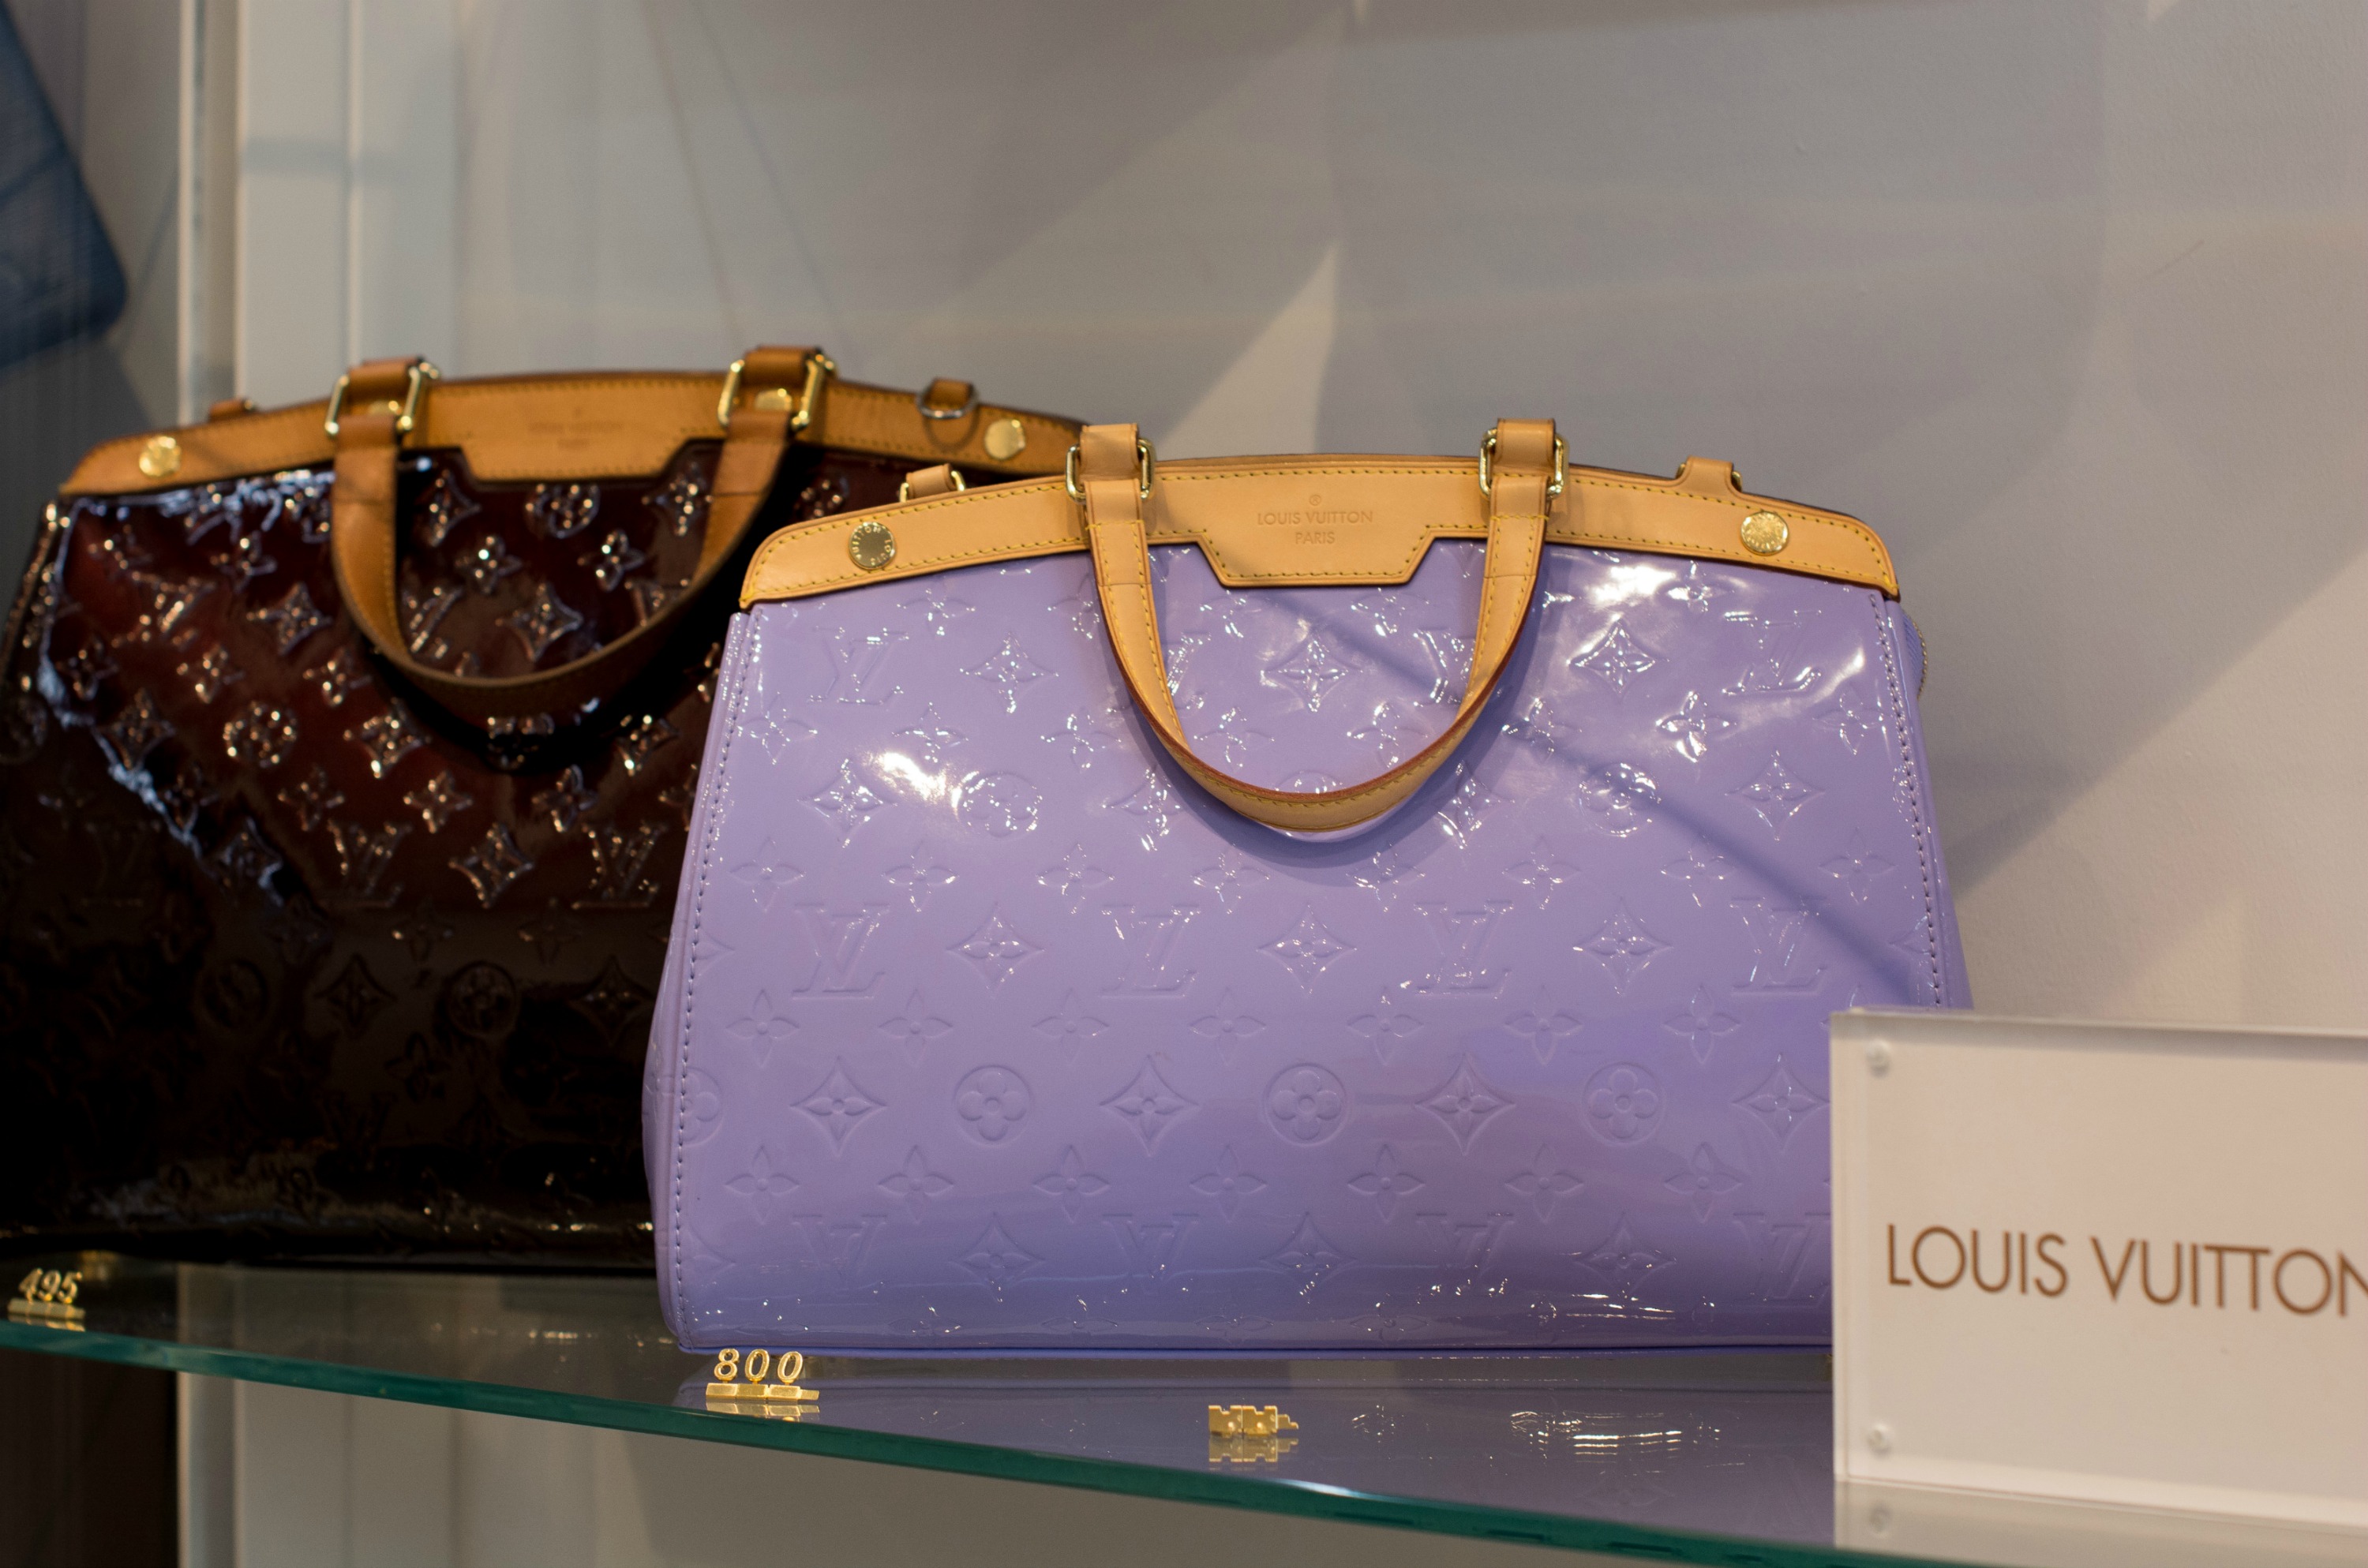 SecondTotes Luxury Pre-Owned Designer Handbags on Sale